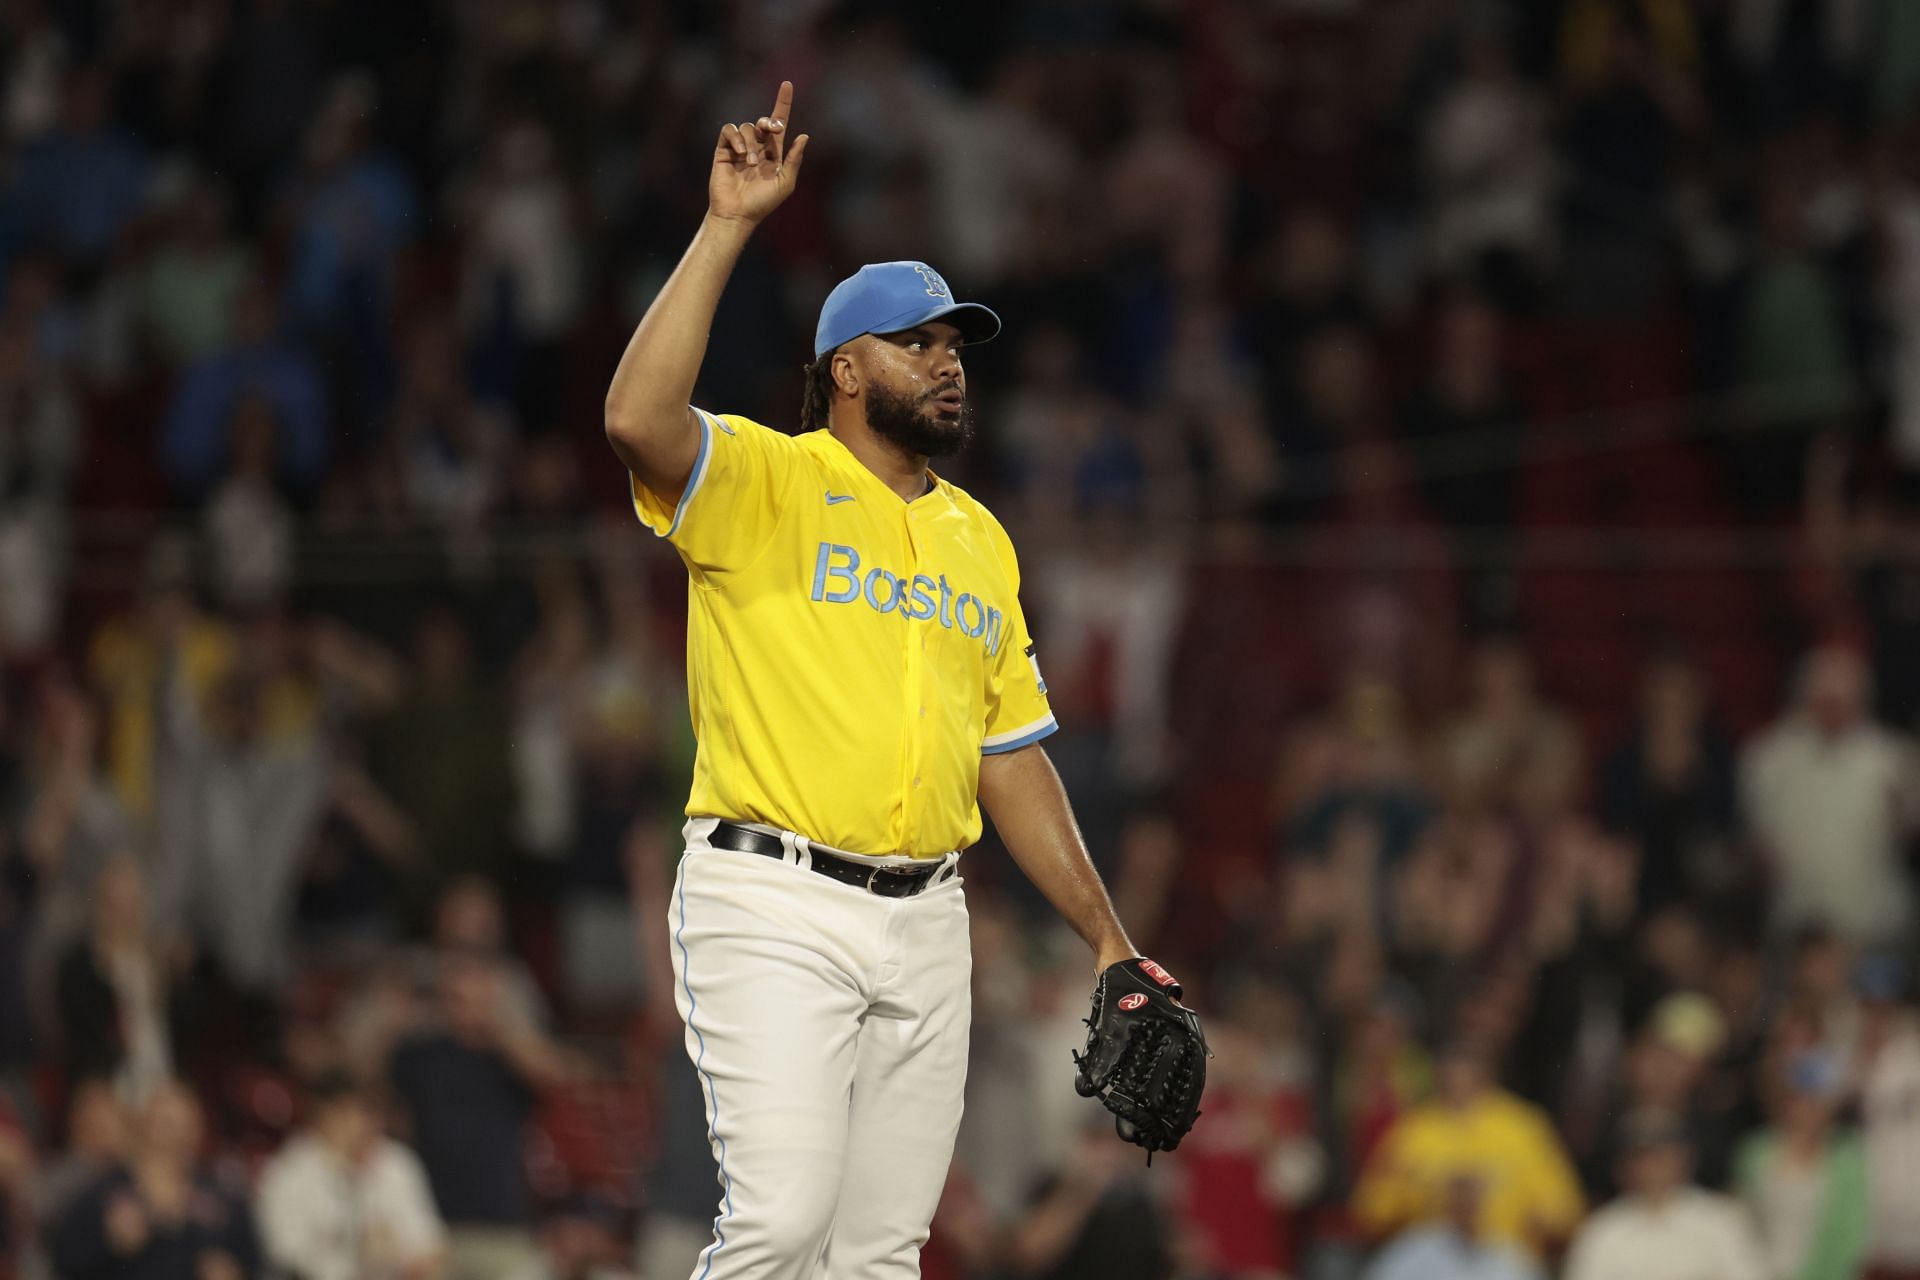 Kenley Jansen might be on the move as according to reports, the Red Sox might be looking at trading him away. 